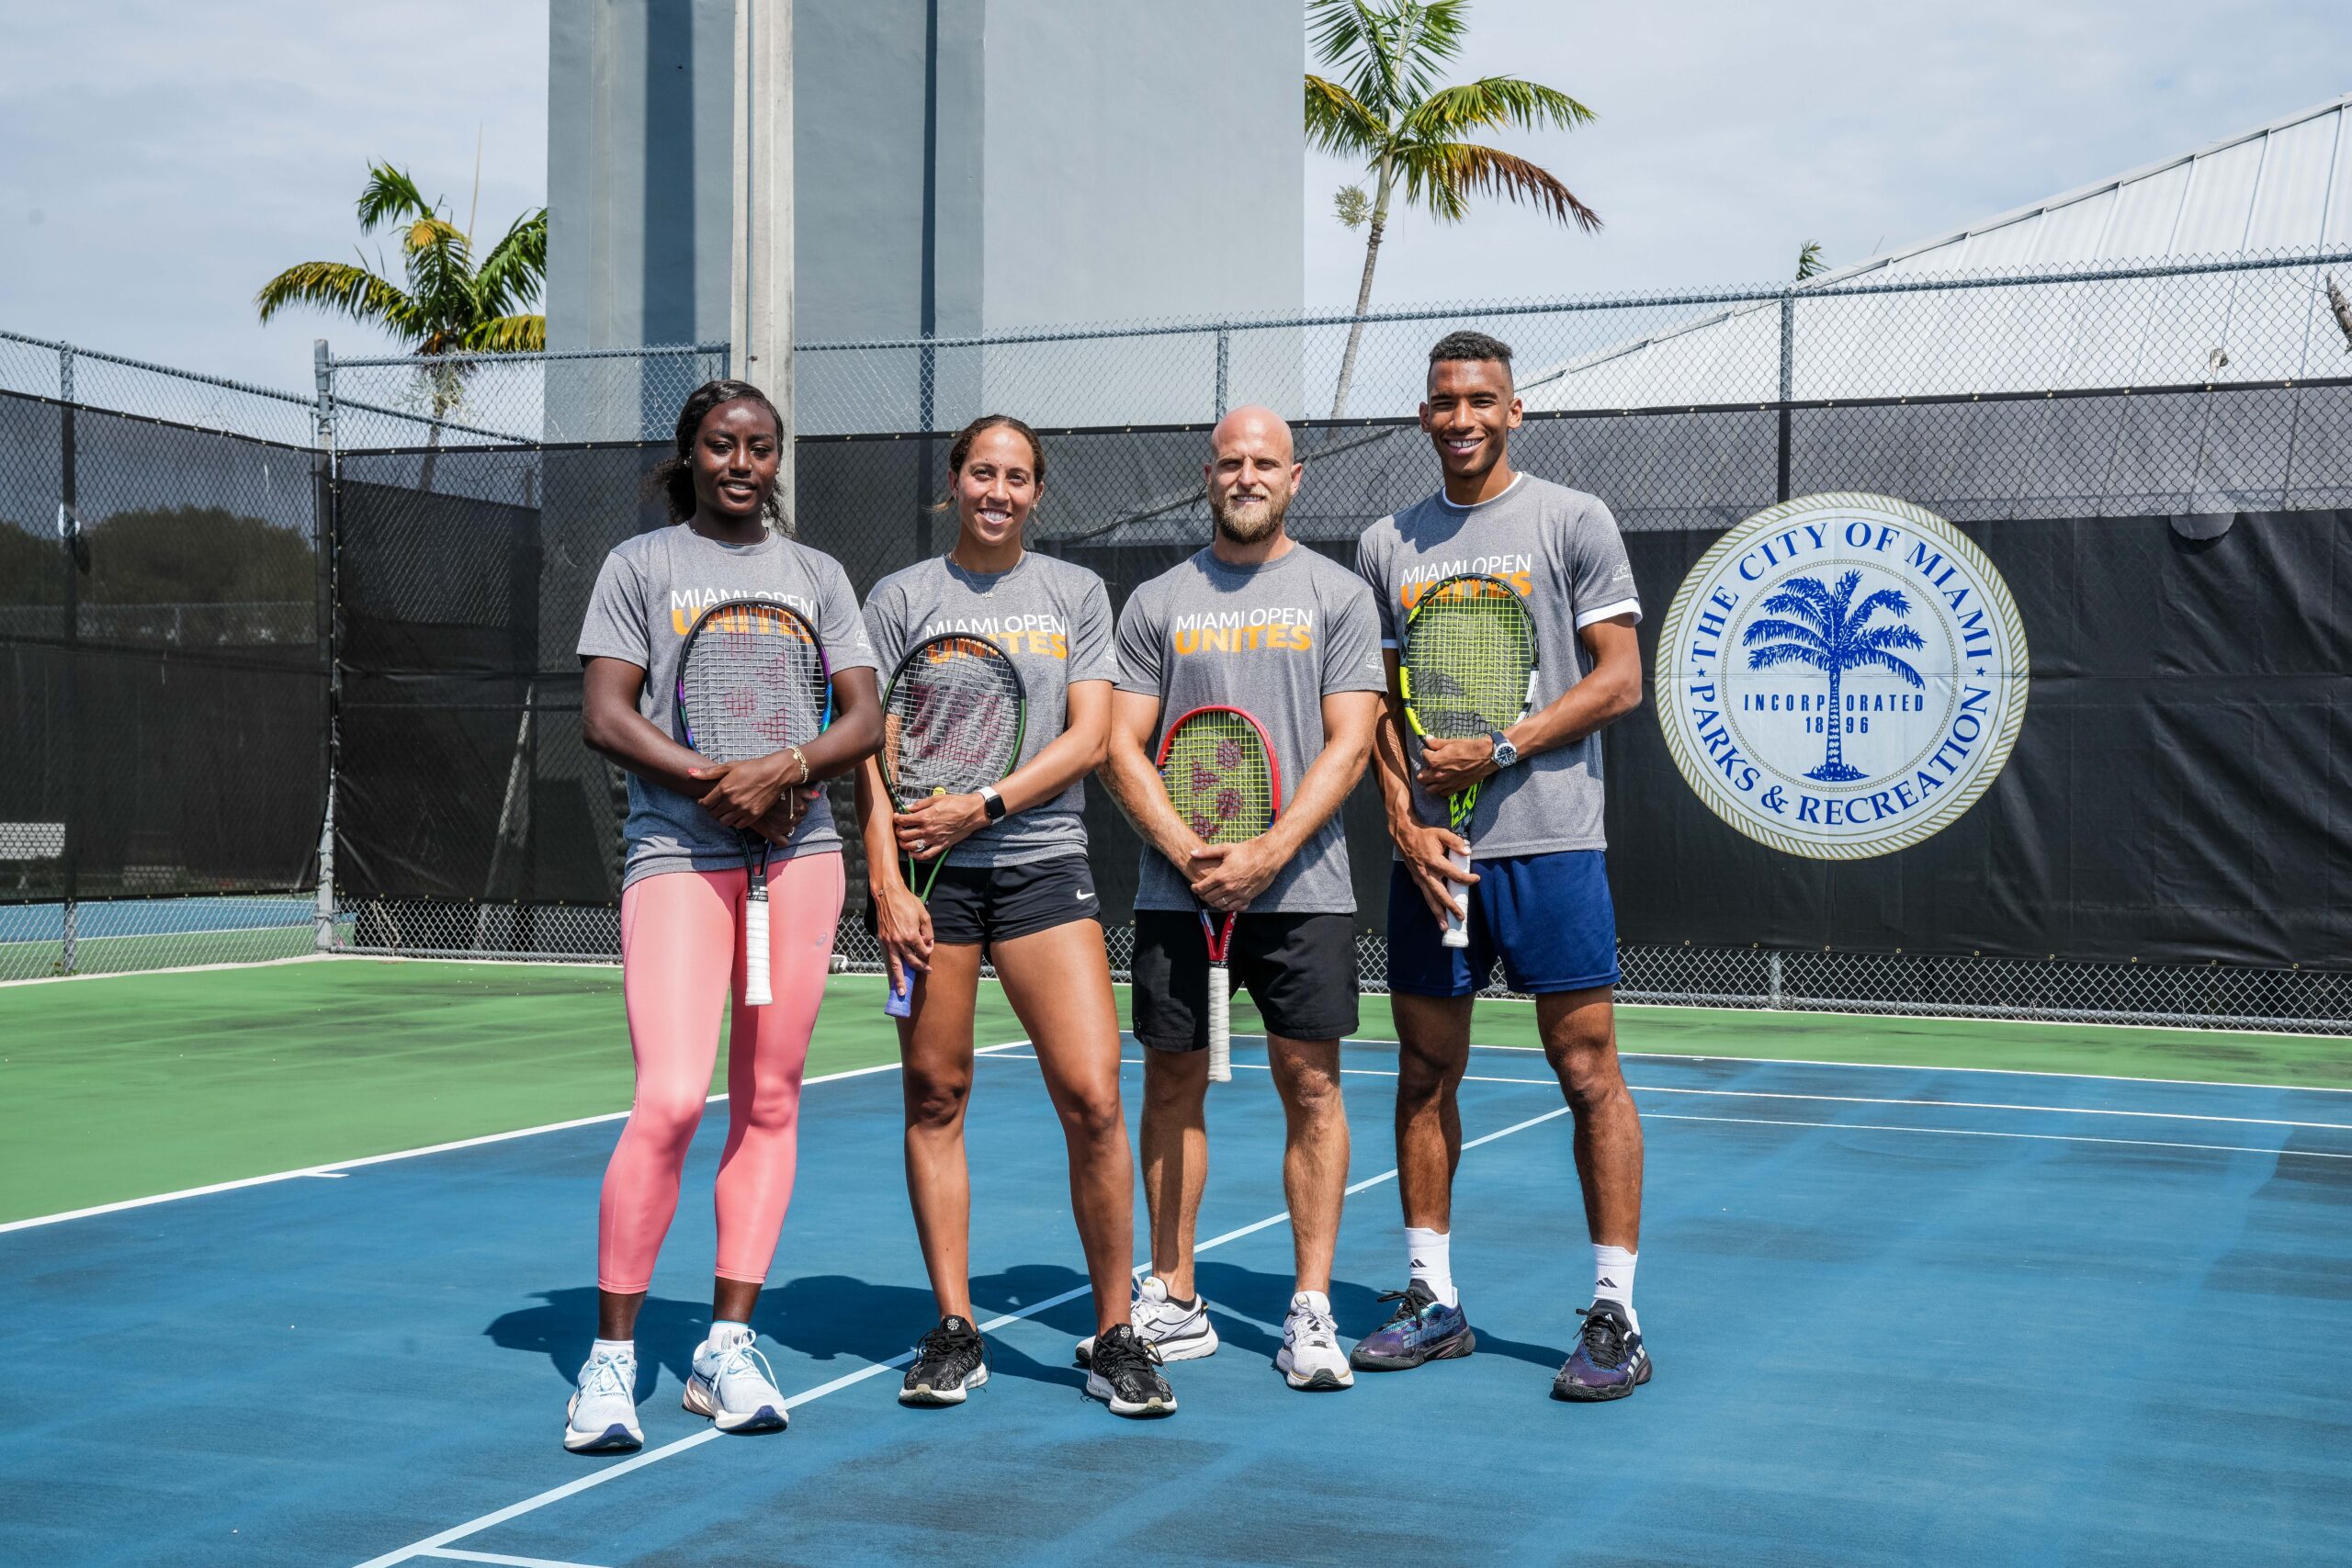 l-r: Alycia Parks, Madison Keys, Denis Kudla and Felix Auger-Aliassime at the Big Brothers, Big Sisters event at Moore Park in Miami on March 20, 2023.